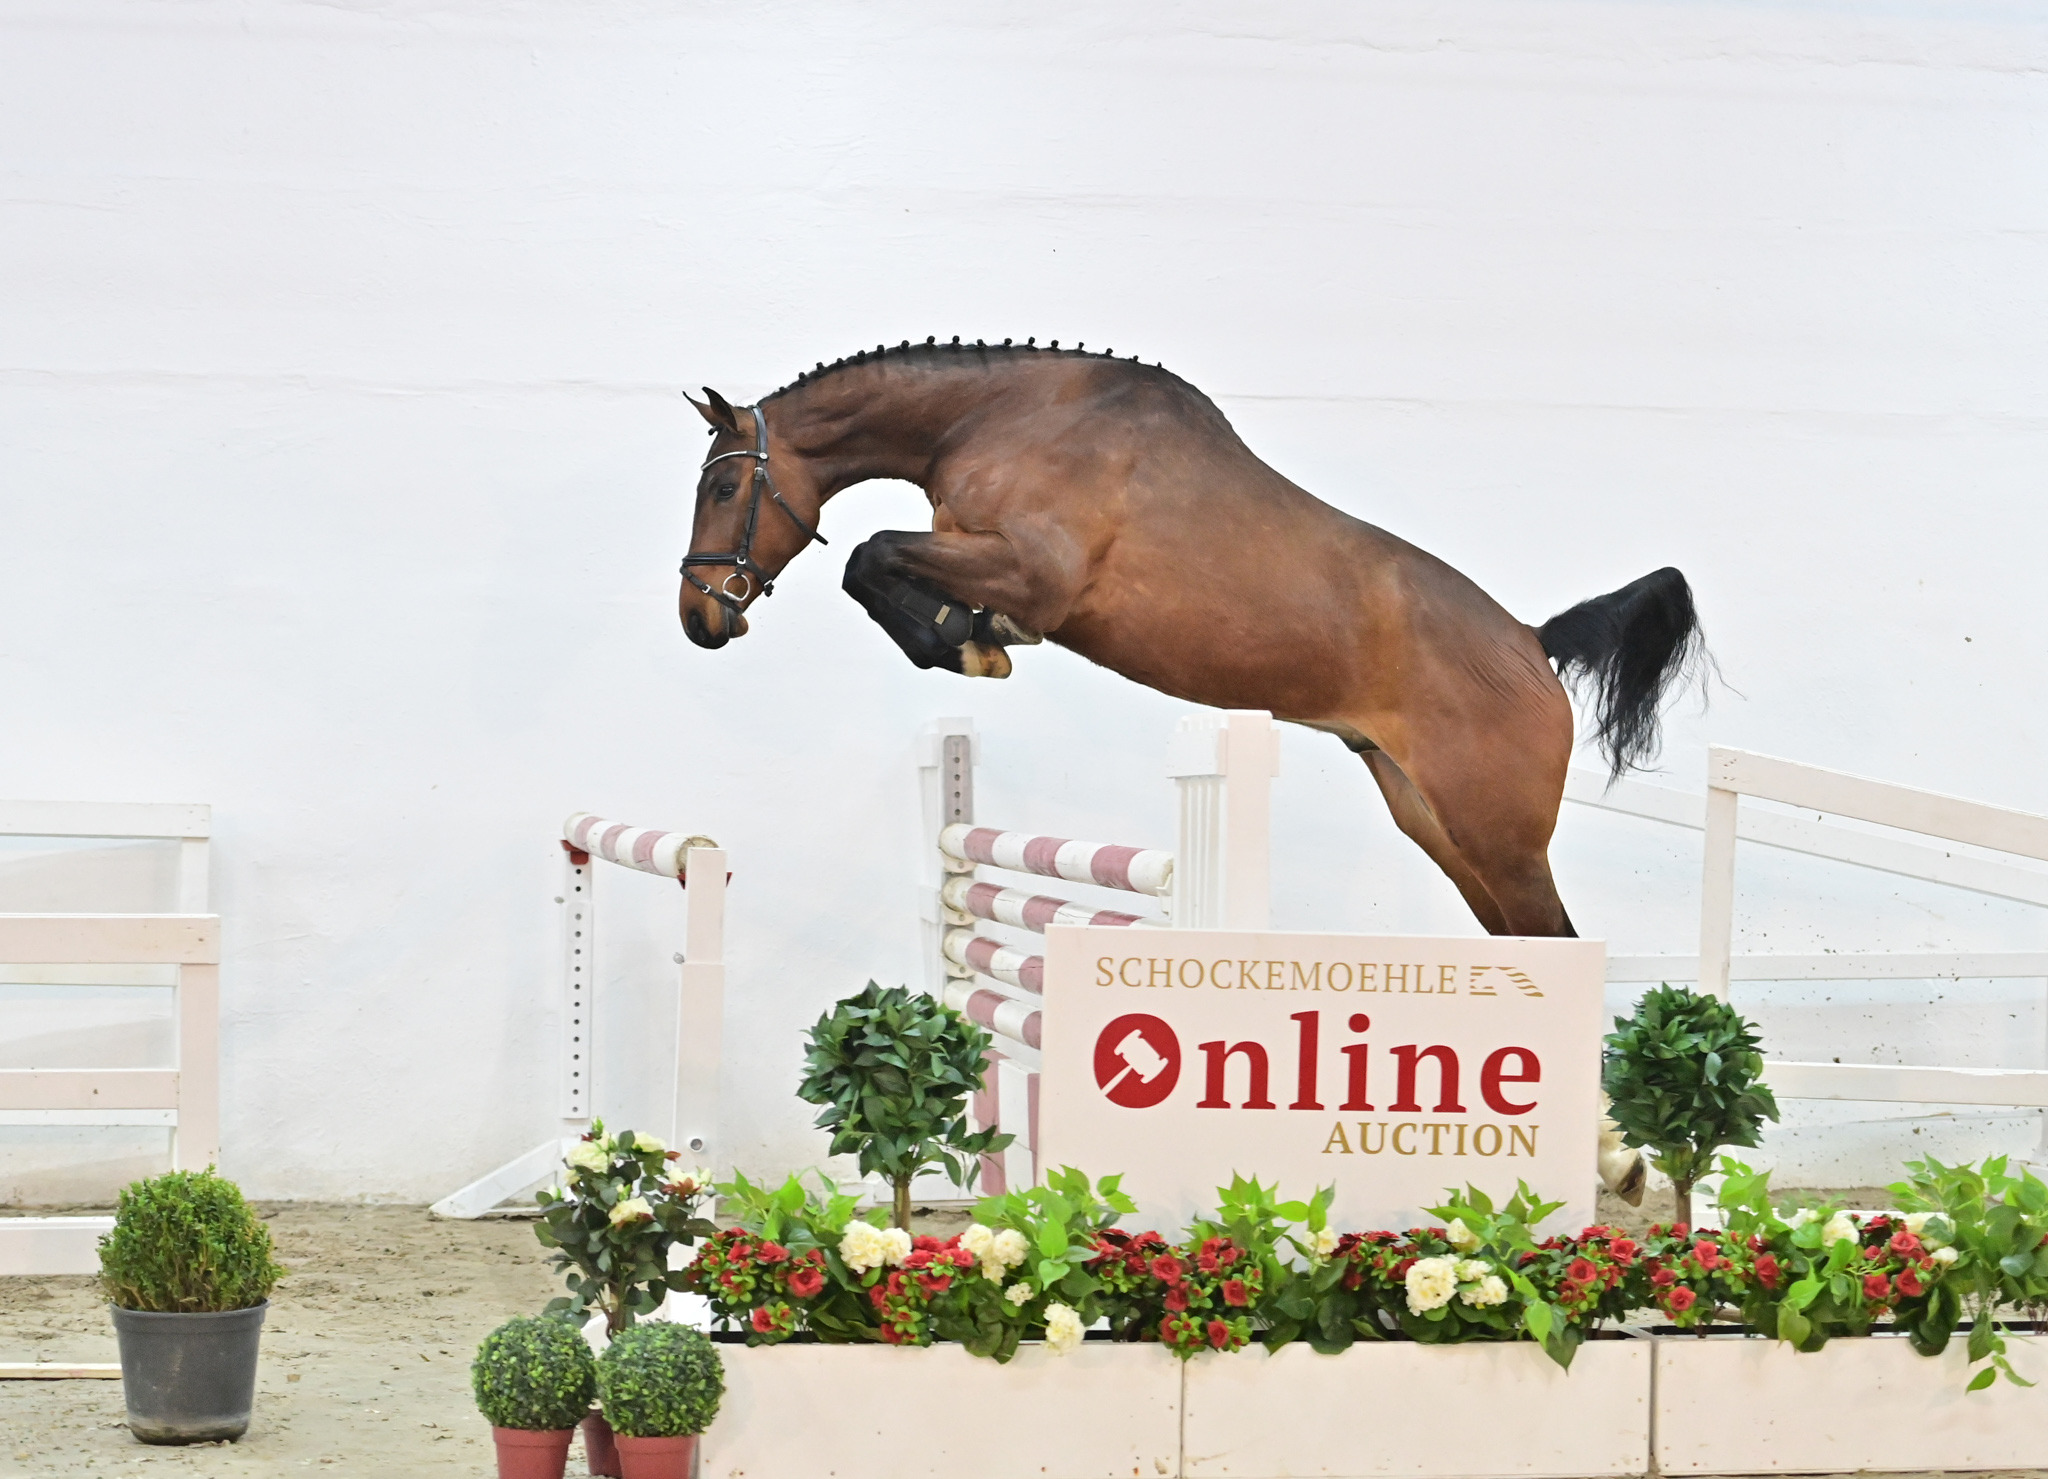 Another 10 talented horses from Paul Schockemöhle for sale during Online Auction